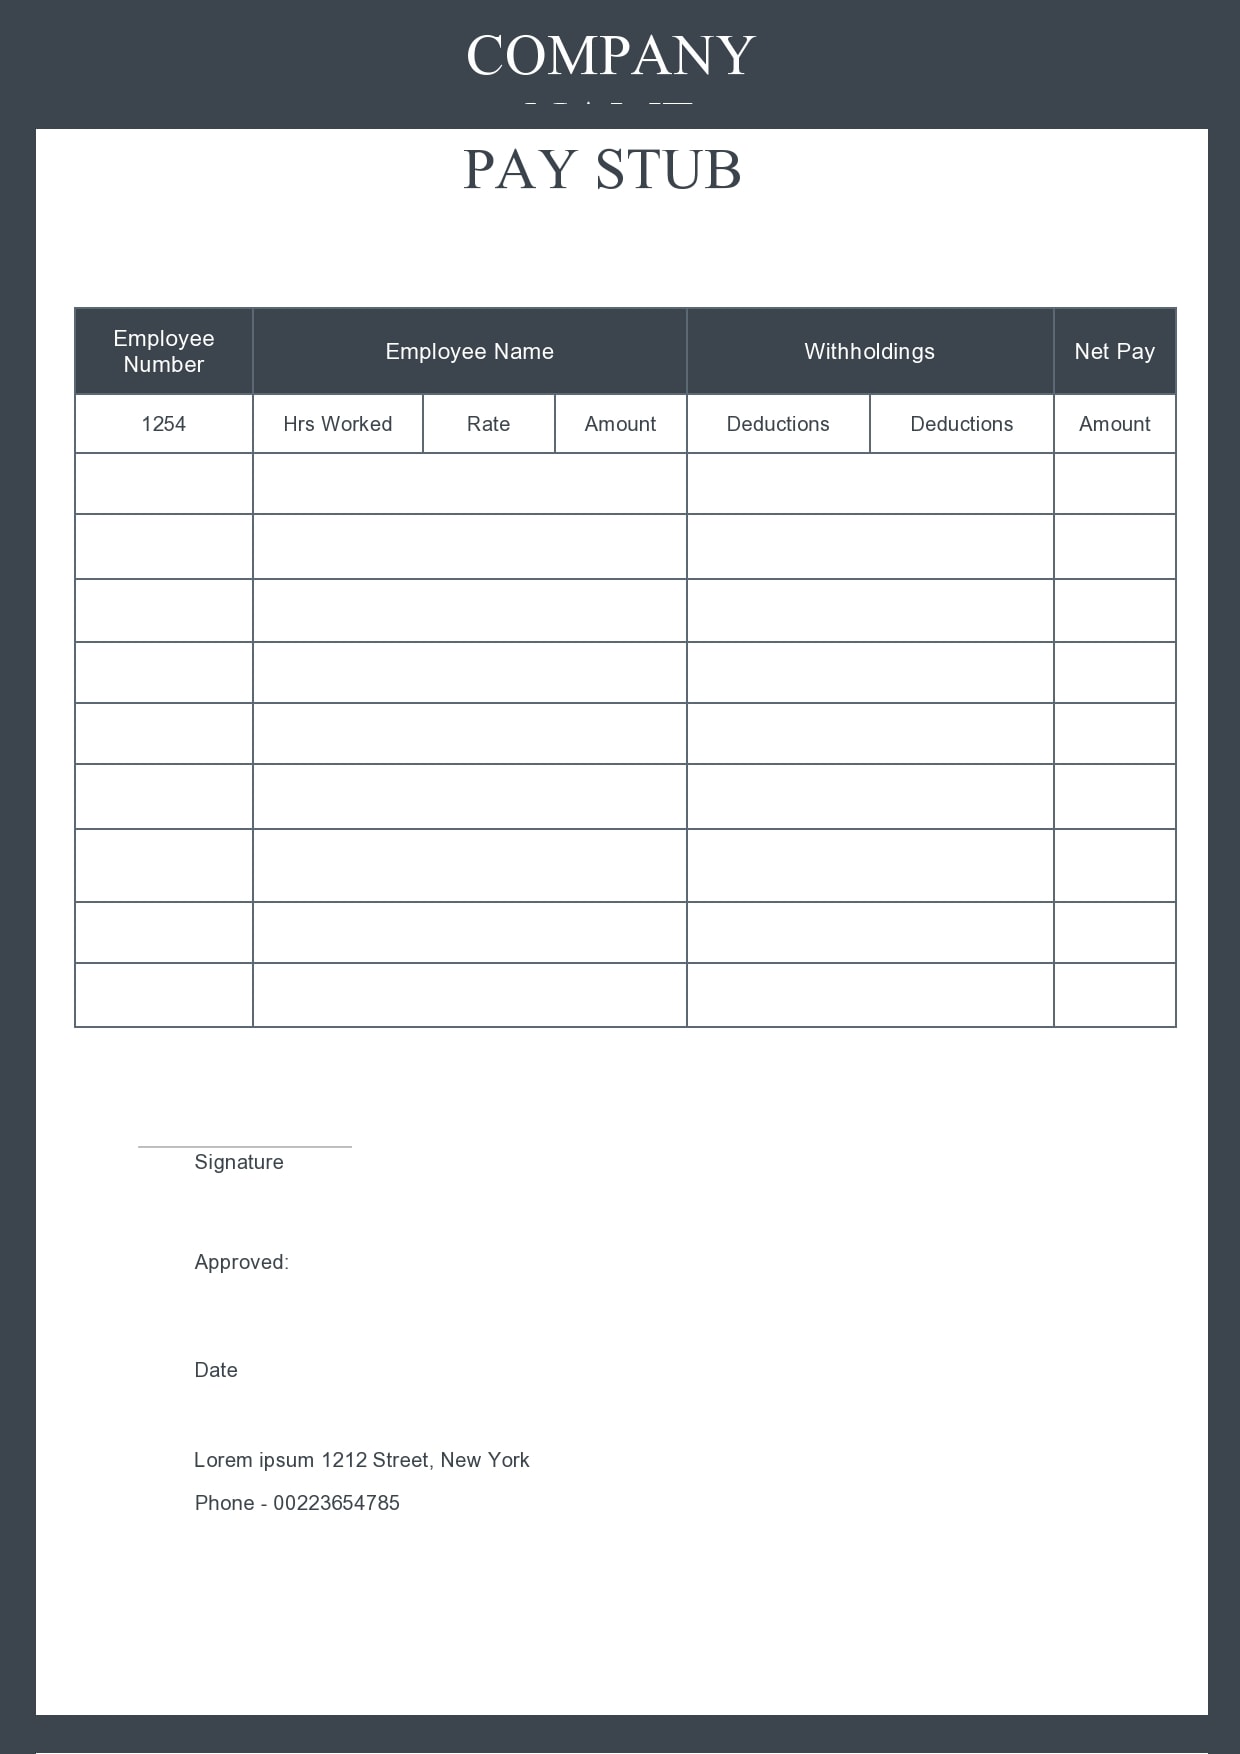 21 Free Pay Stub Templates [Excel, Word] - PrintableTemplates For Pay Stub Template Word Document